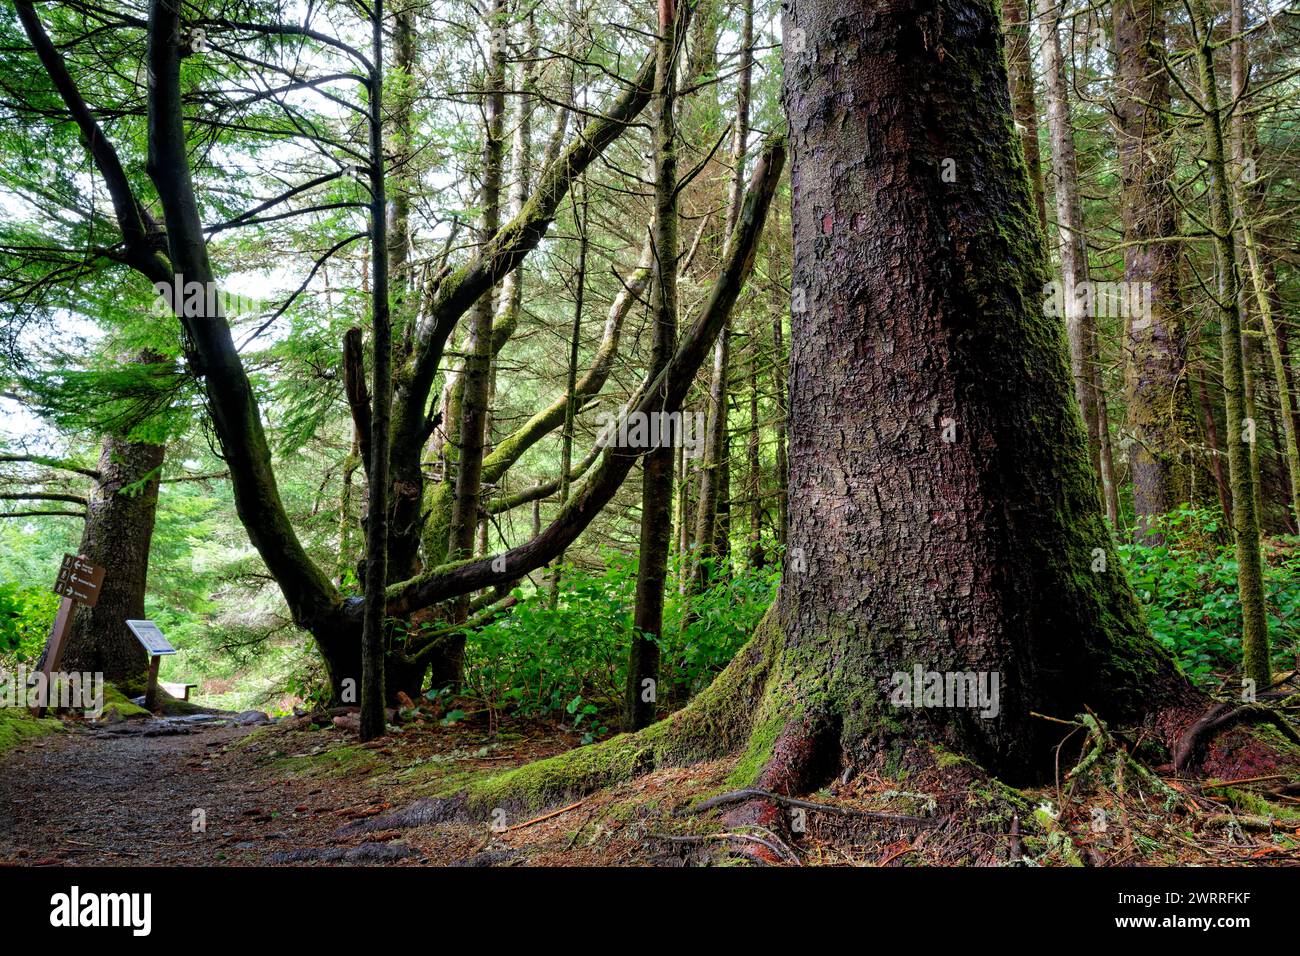 A large sitka spruce tree on a trail, Port Renfrew, Vancouver Island, BC Canada Stock Photo